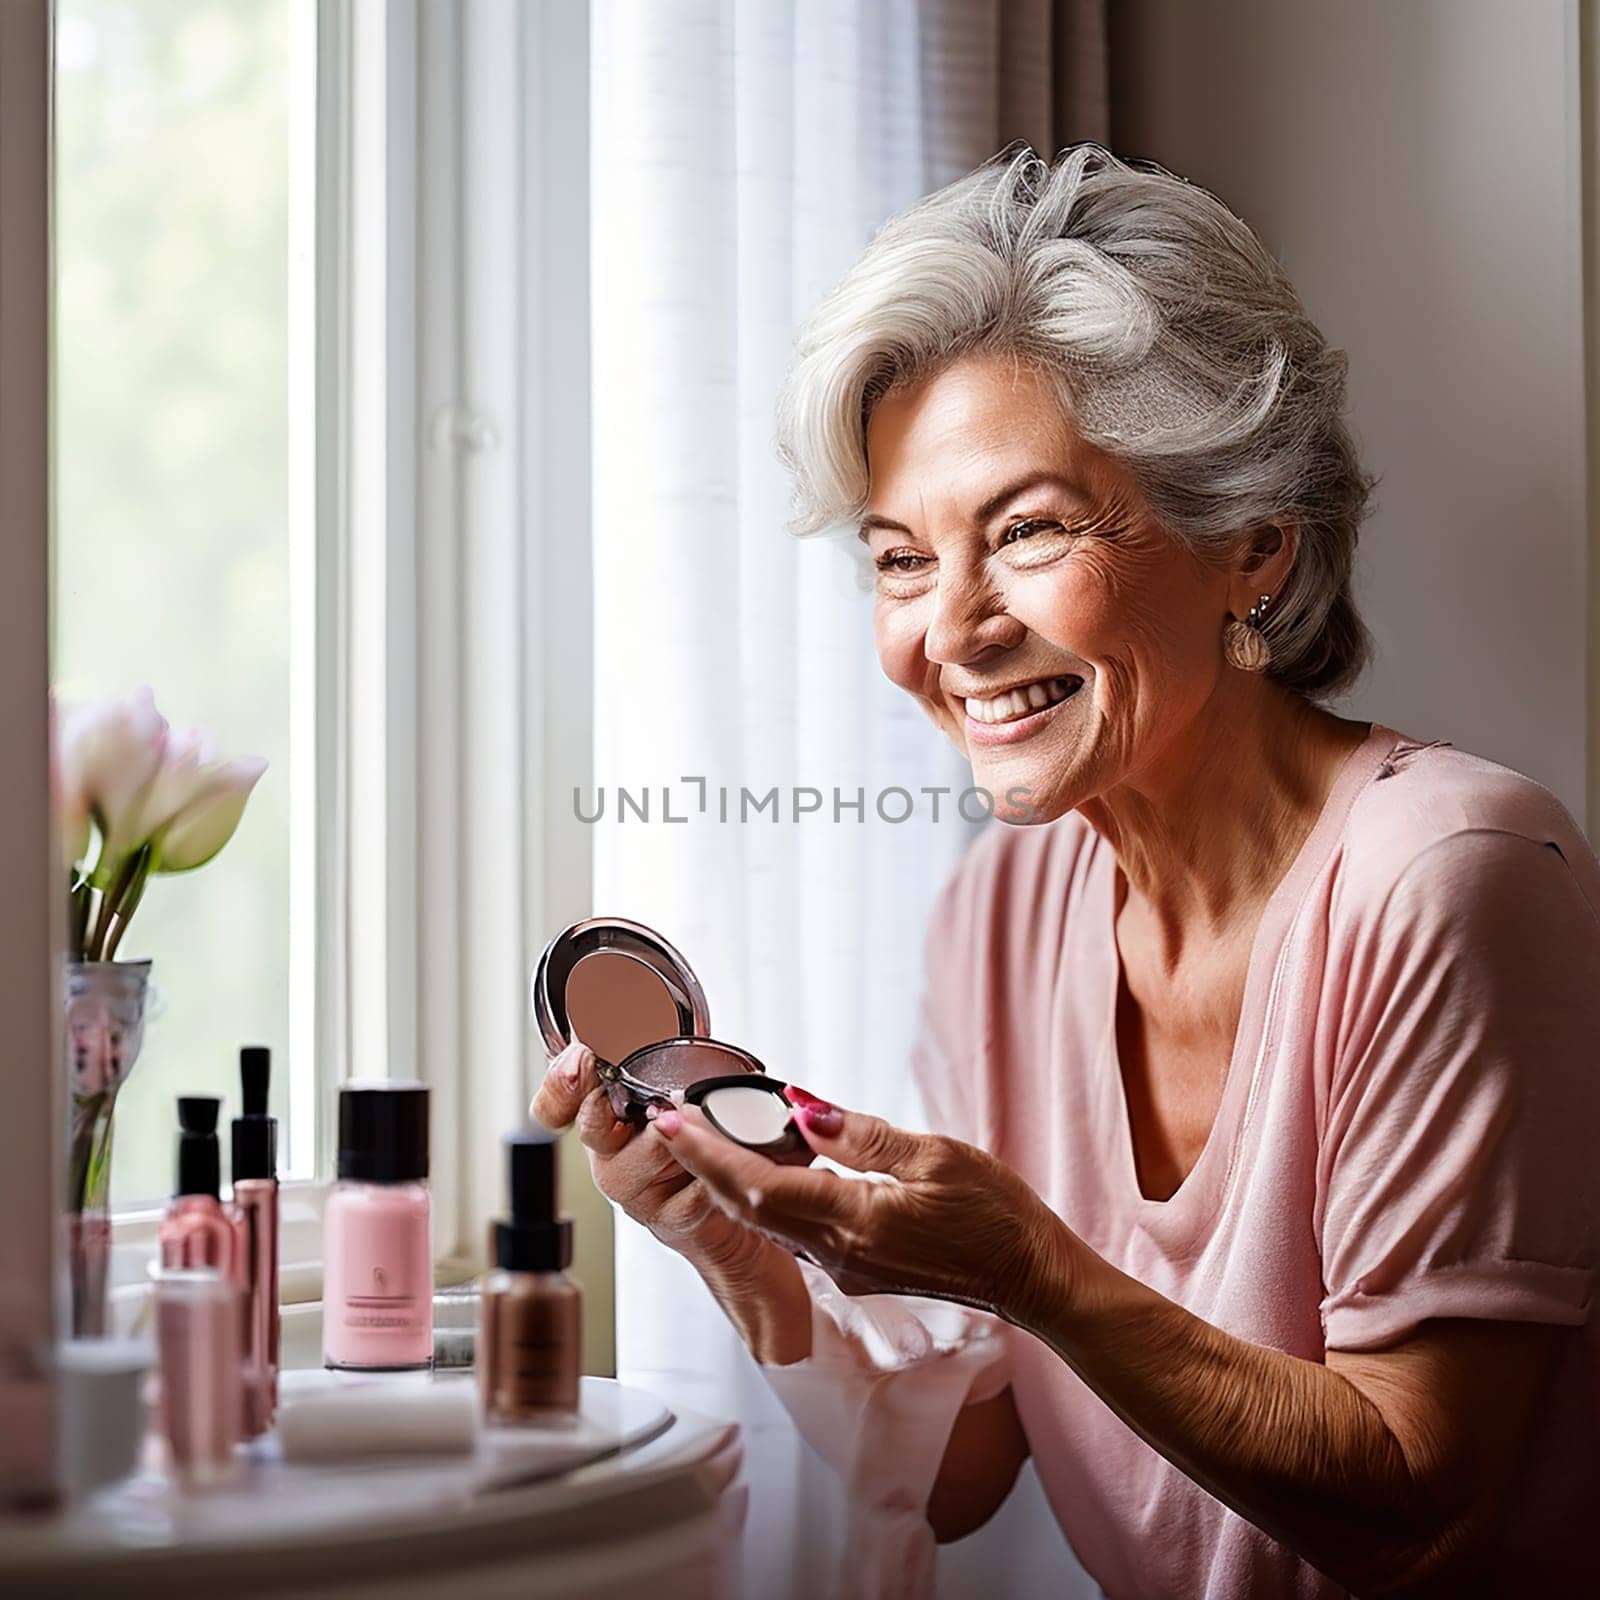 Graceful Transformation: Senior Woman's Close-Up in Front of the Bathroom Mirror